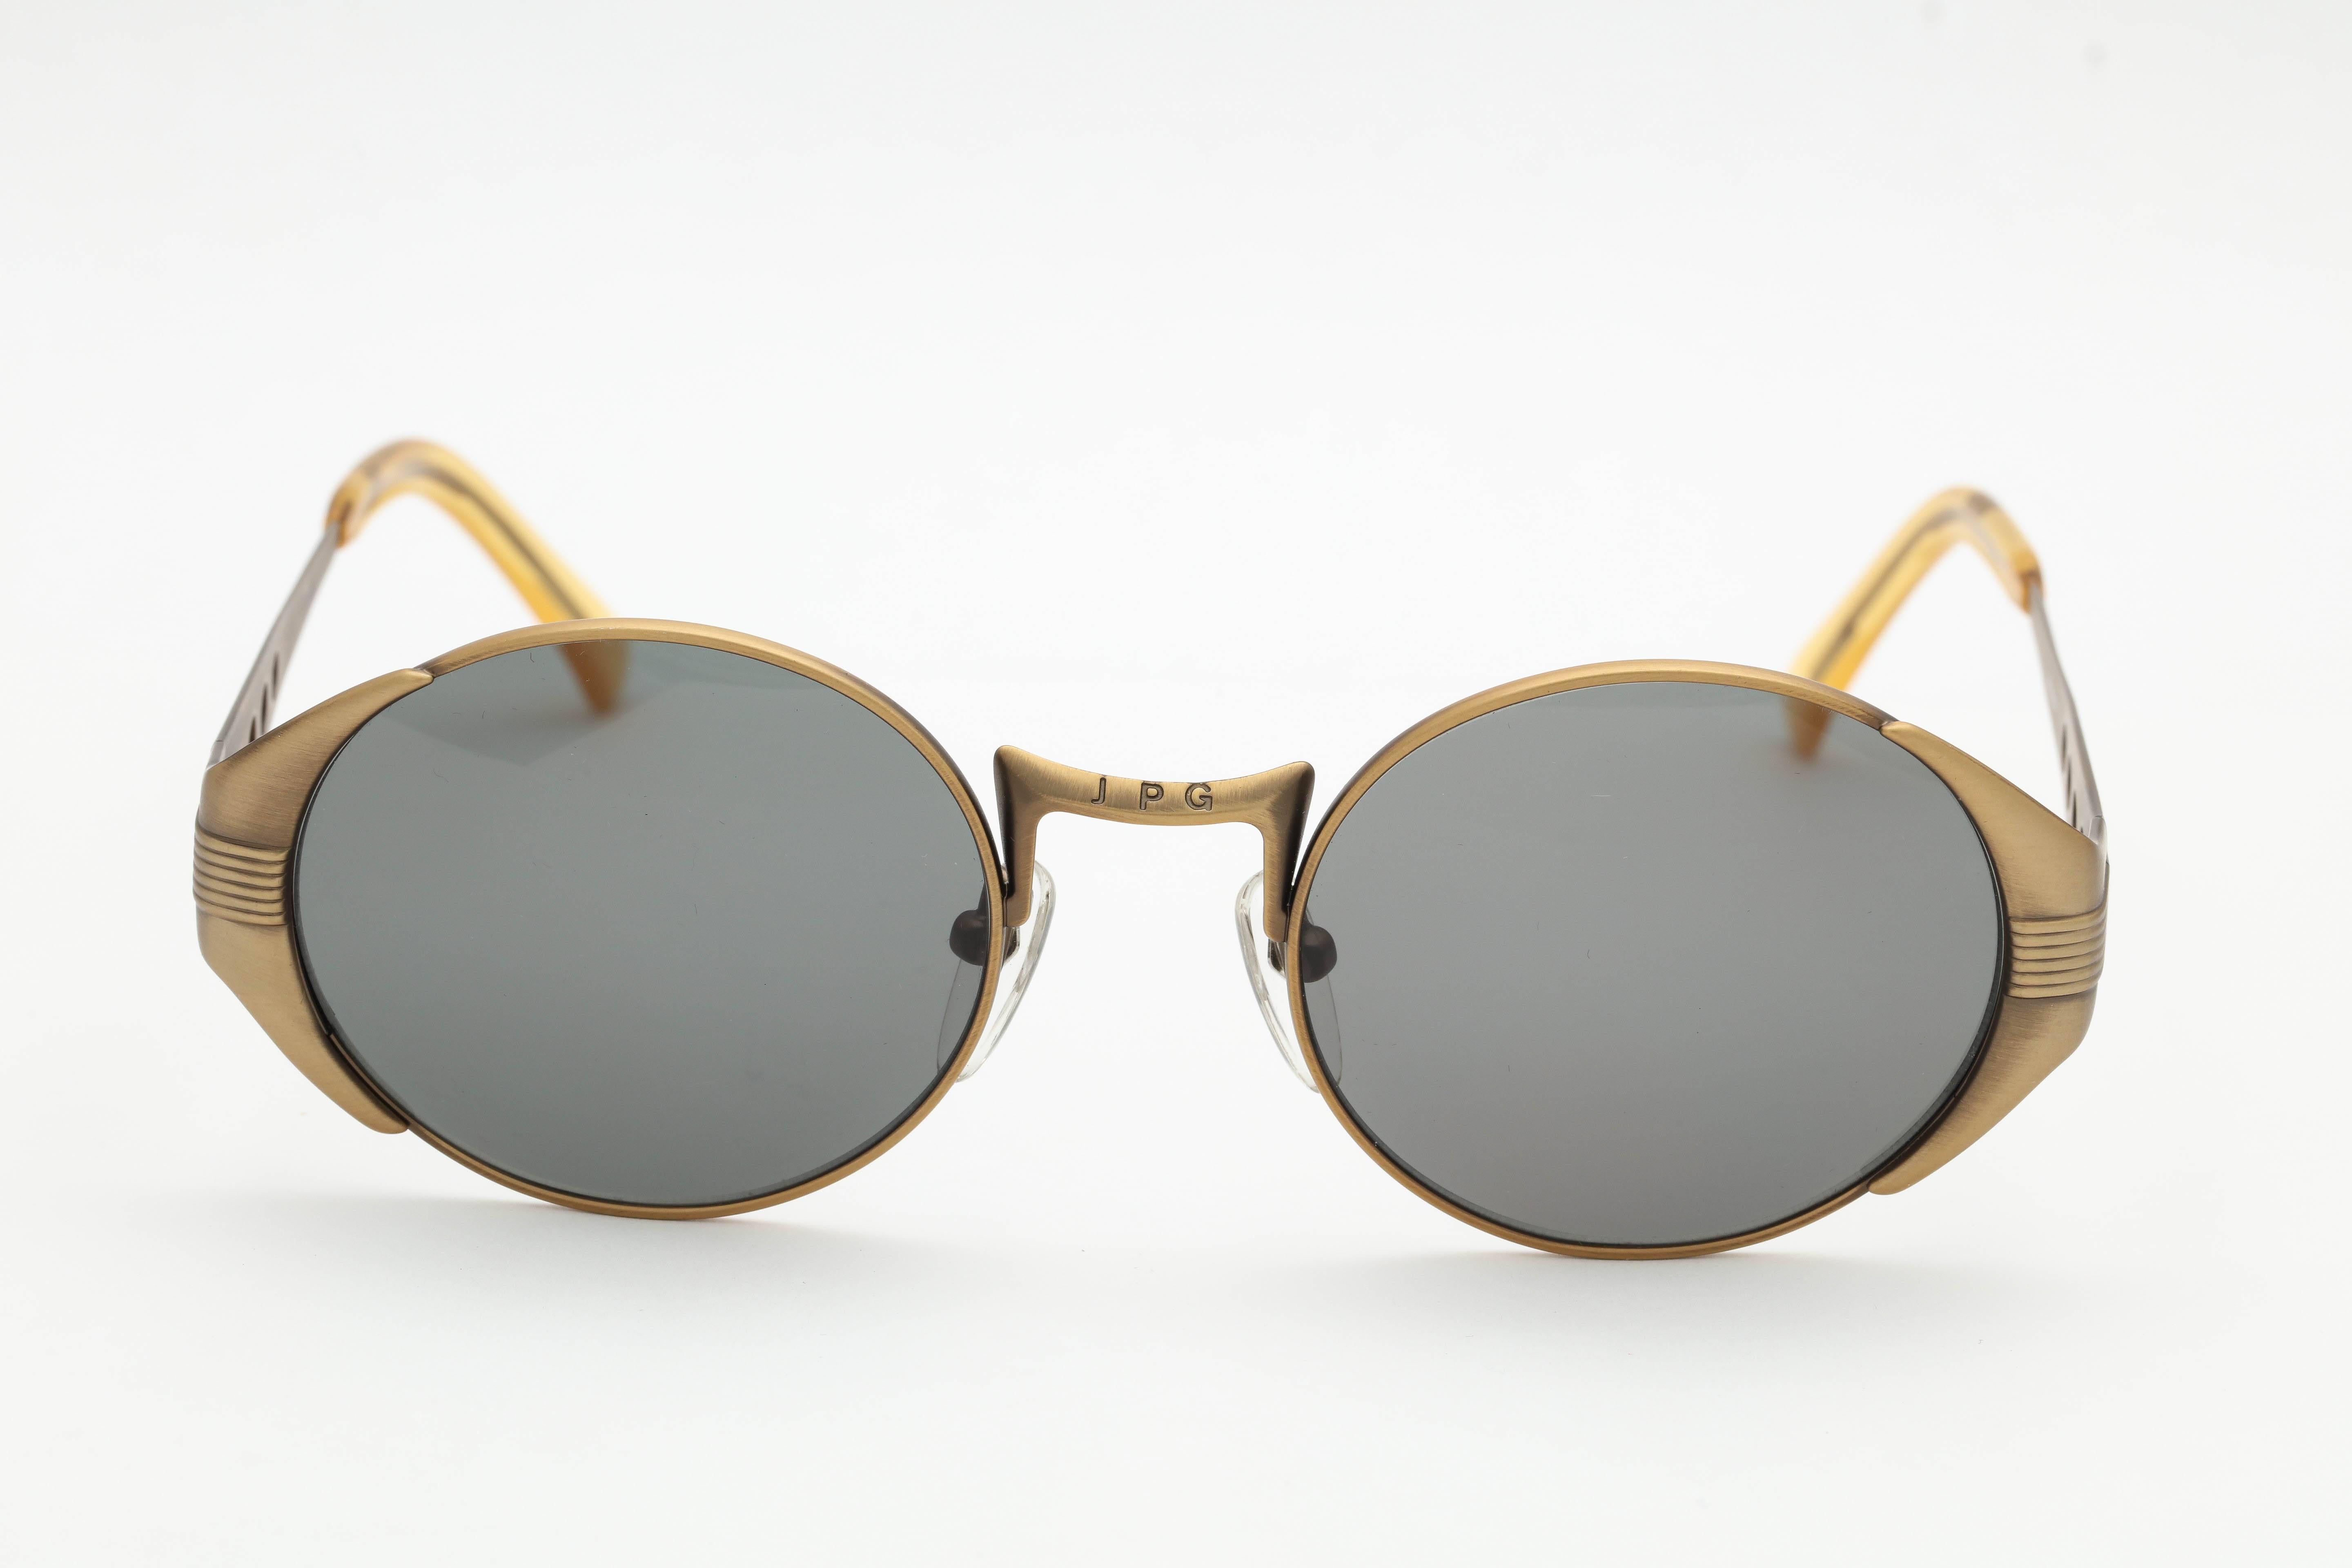 Jean Paul Gaultier Vintage Sunglasses 56-3174 In Excellent Condition For Sale In Chicago, IL